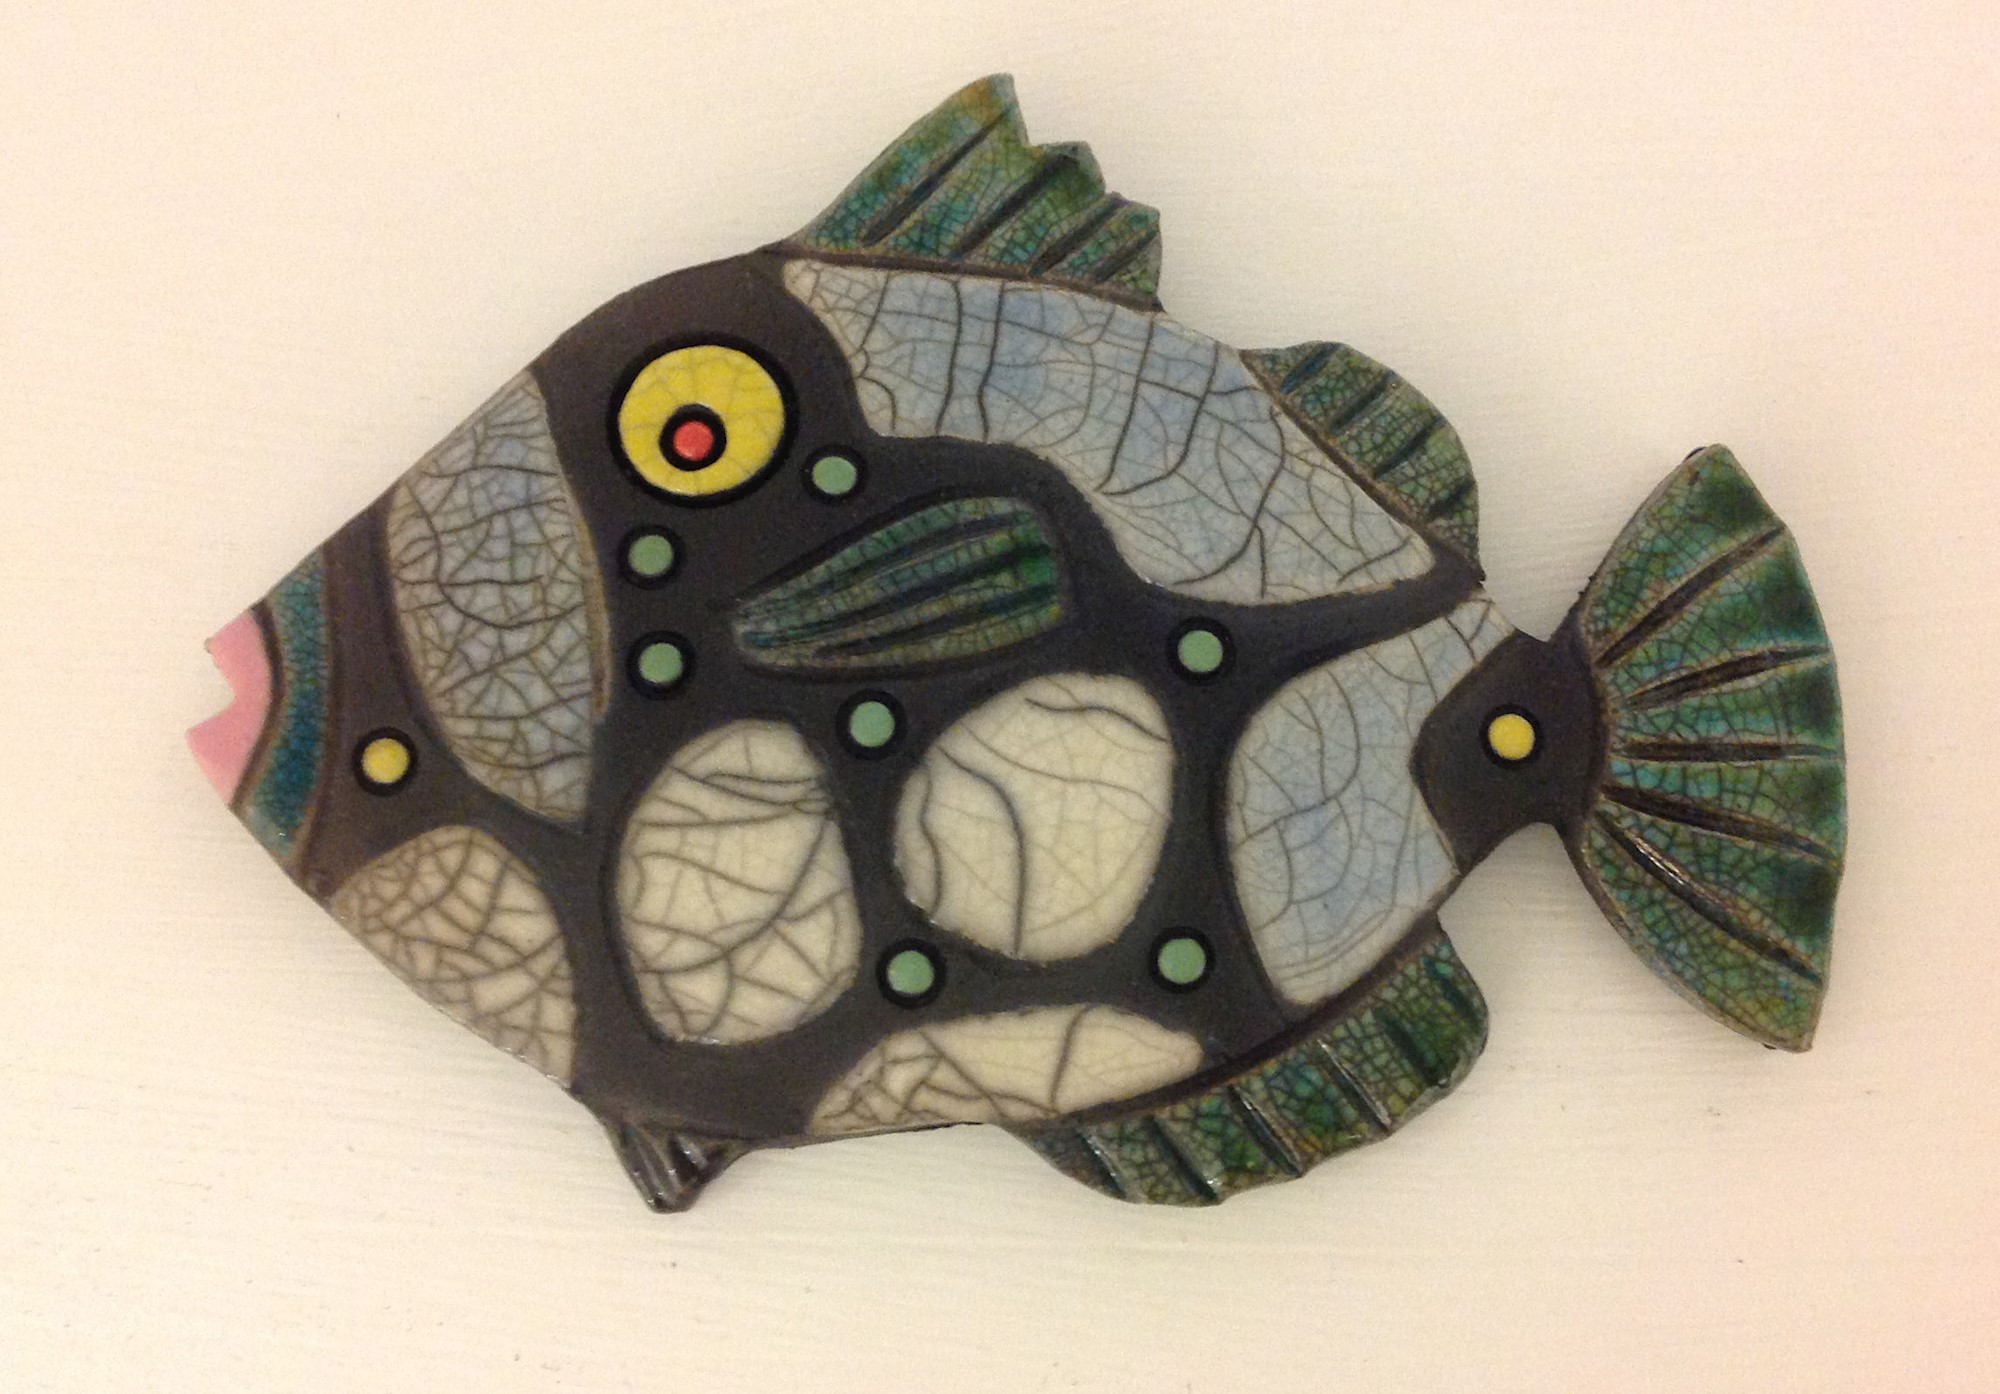 'Trigger Fish Small' by artist Julian Smith